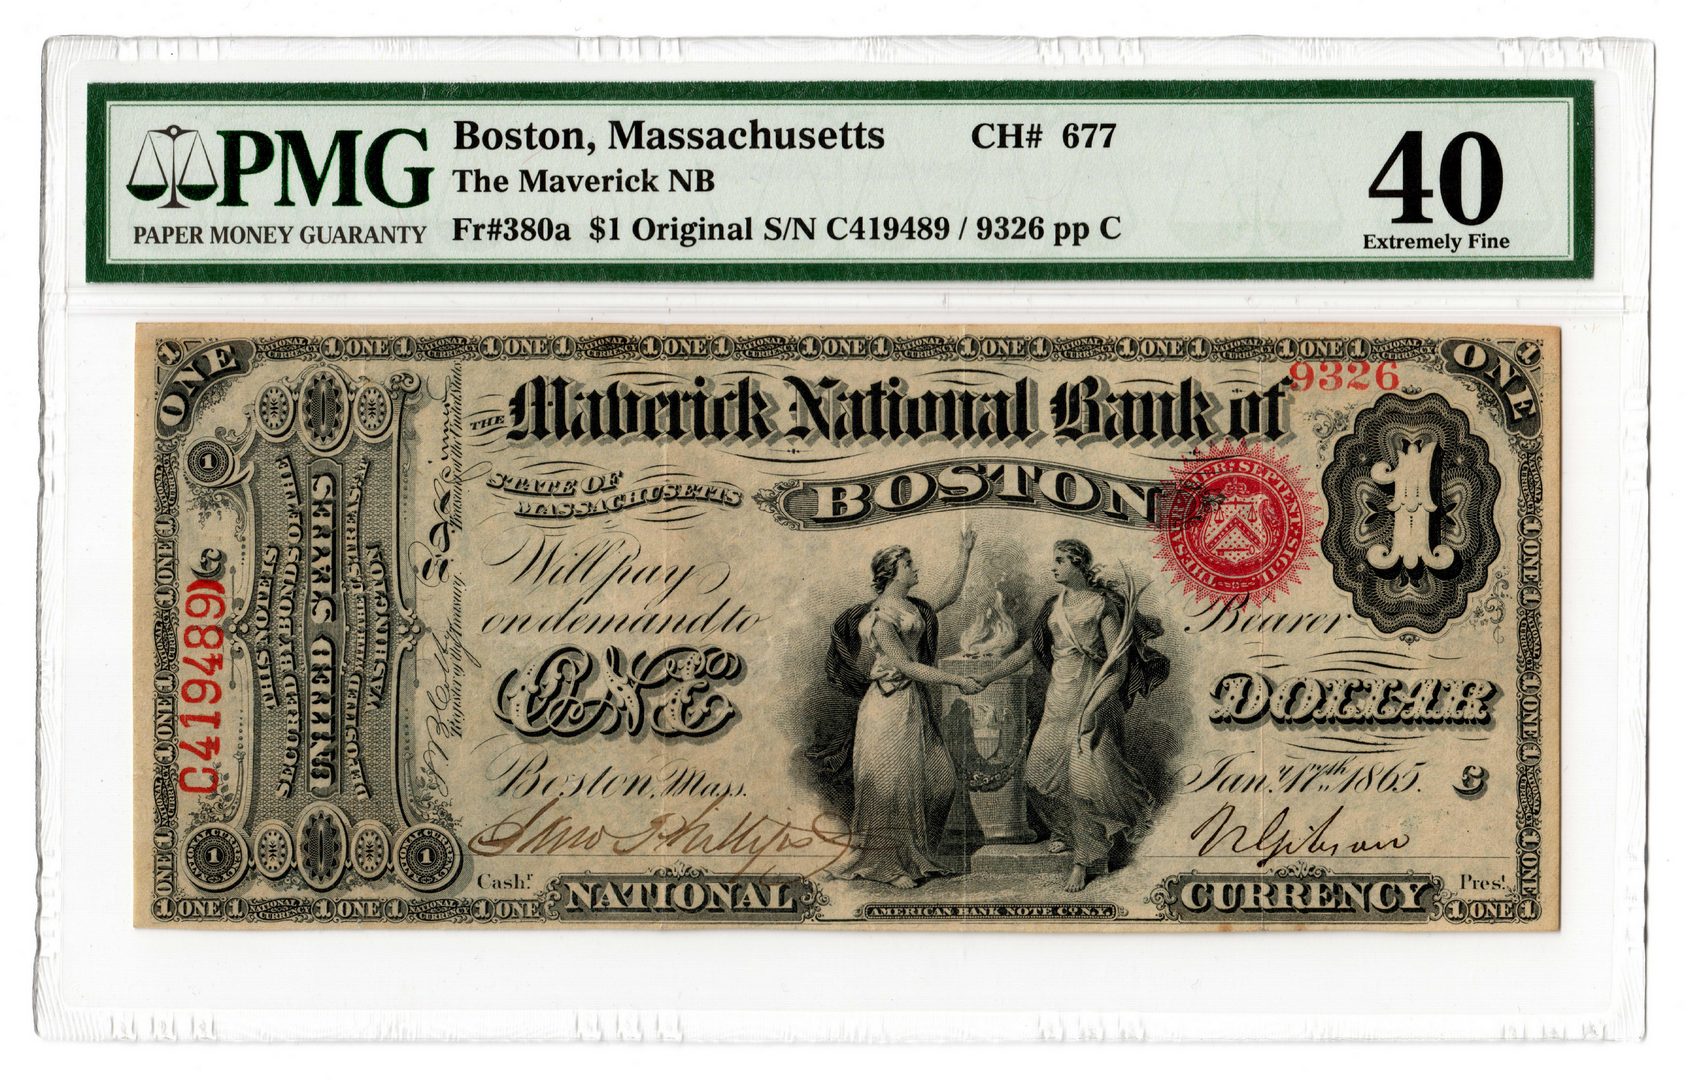 Image of the front of a Maverick National Bank One Dollar Note from 1865 signed by Nehemiah Gibson